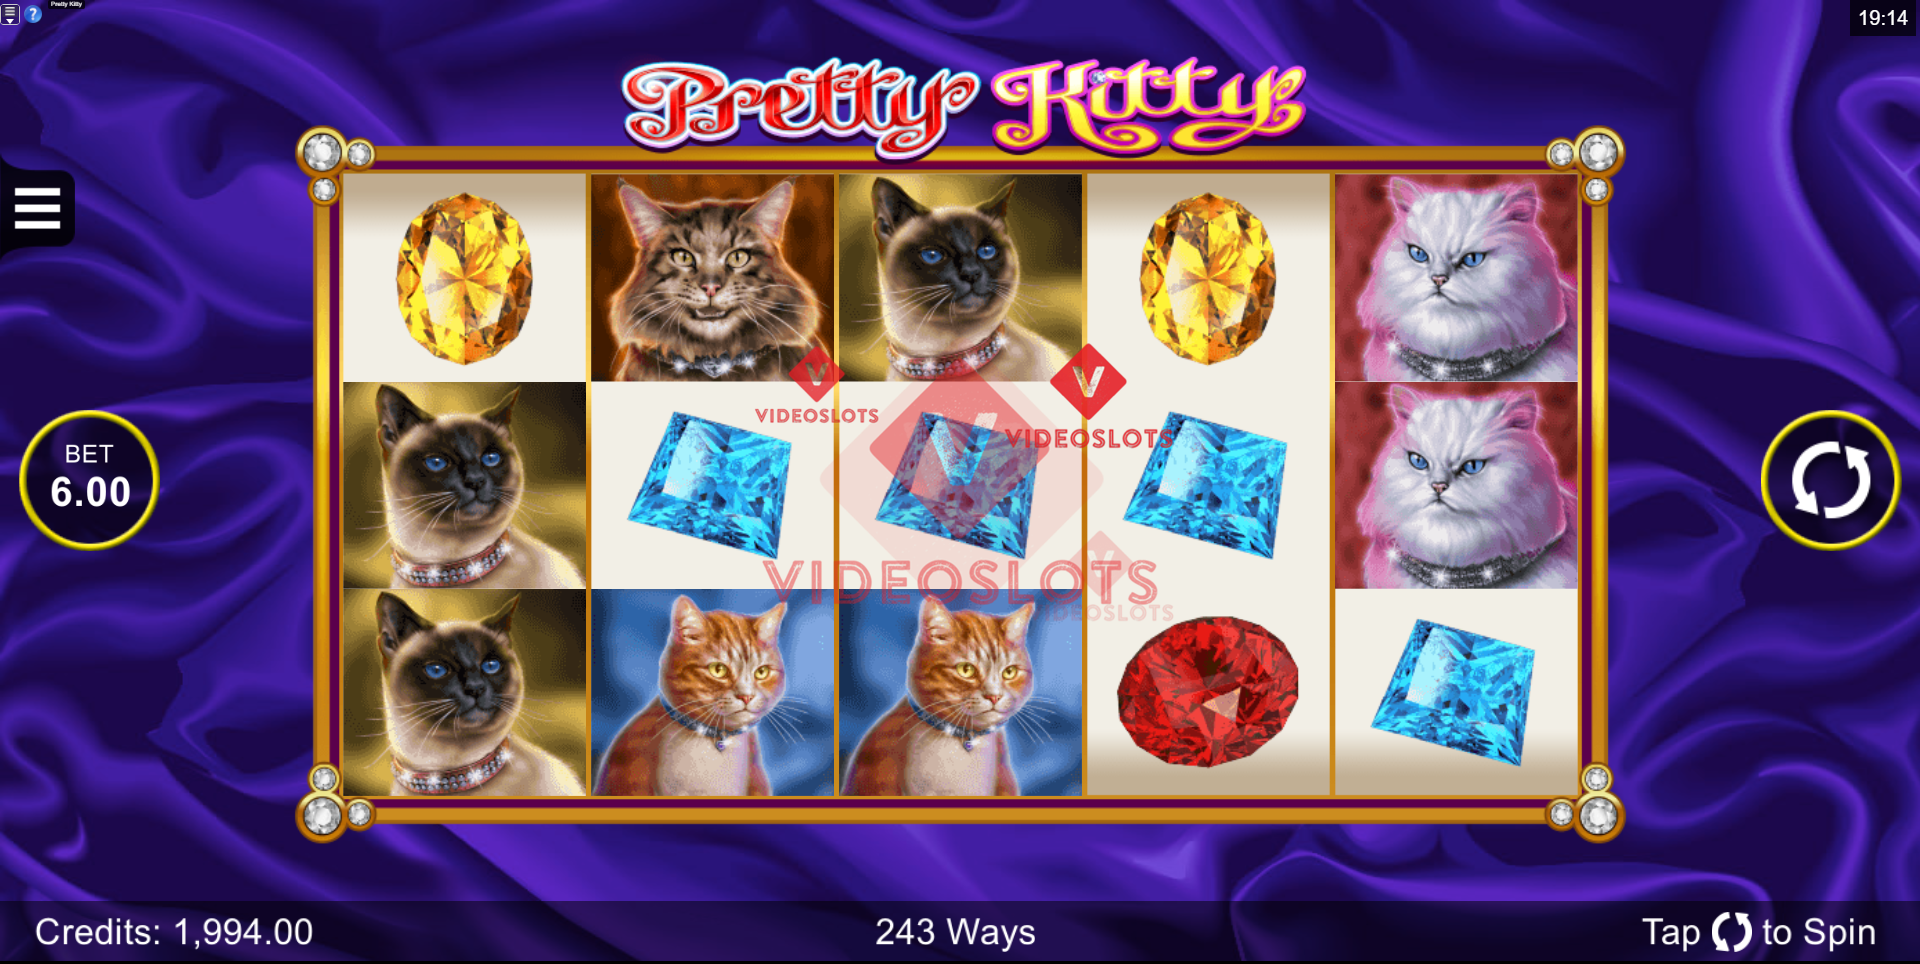 Base Game for Pretty Kitty slot for Microgaming